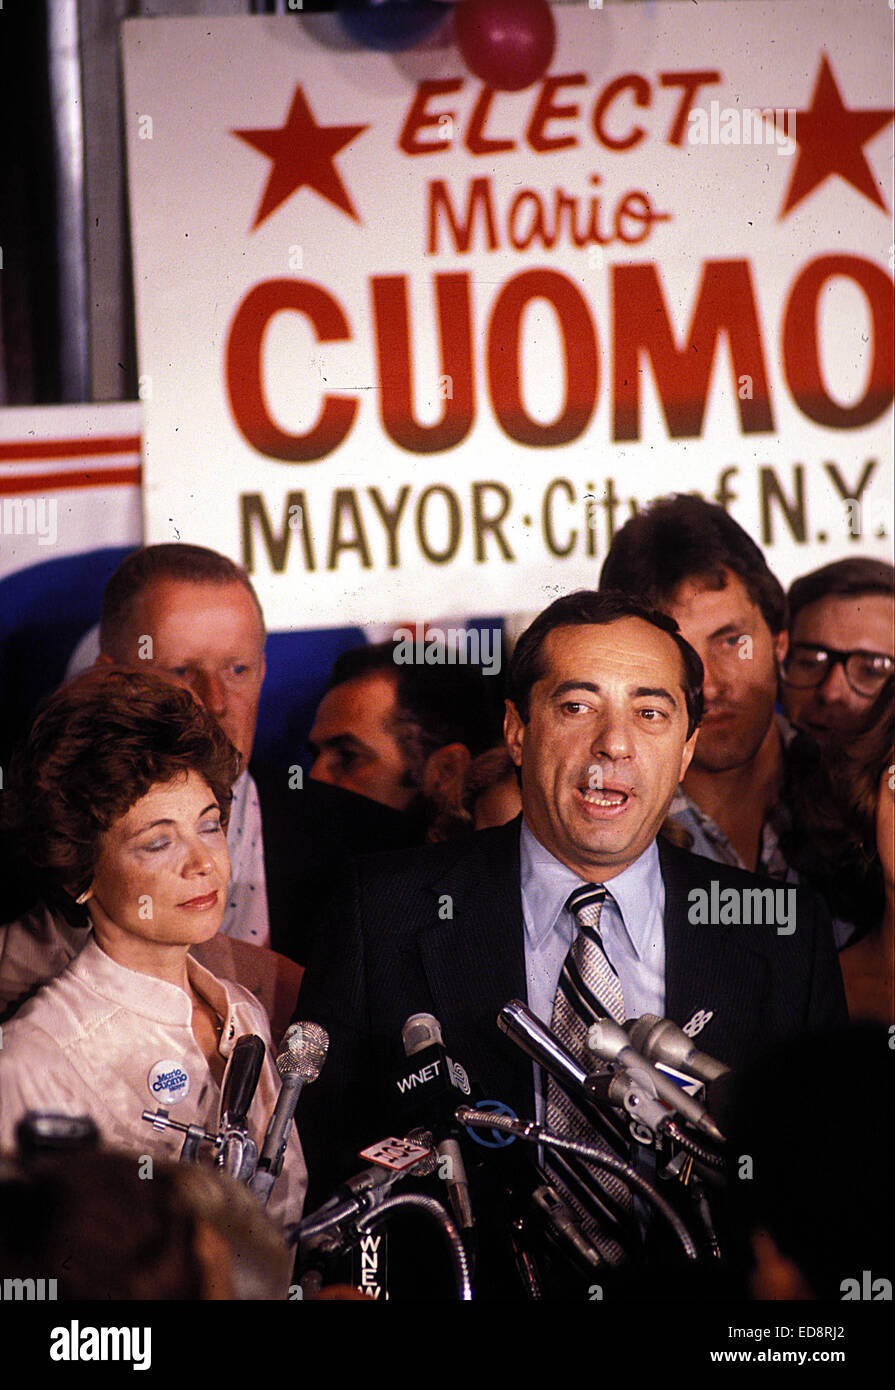 File. 1st Jan, 2015. Former New York Gov. MARIO CUOMO (June 15, 1932 - January 1, 2015) died today at 82. Mario Cuomo had been hospitalized recently to treat a heart condition. He passed away at home, shortly before 5 p.m. ET. The Democrat was governor for three terms, from 1983 to 1995. He was married to his wife, Matilda, for more than six decades. They had five children, including current New York Gov. Andrew Cuomo, who was sworn in for his second term today. Pictured - 1977 - New York, New York, U.S. - Mario Cuomo campaigns for Mayor. Credit Image: © Globe Photos/ZUMAPRESS.com) Stock Photo